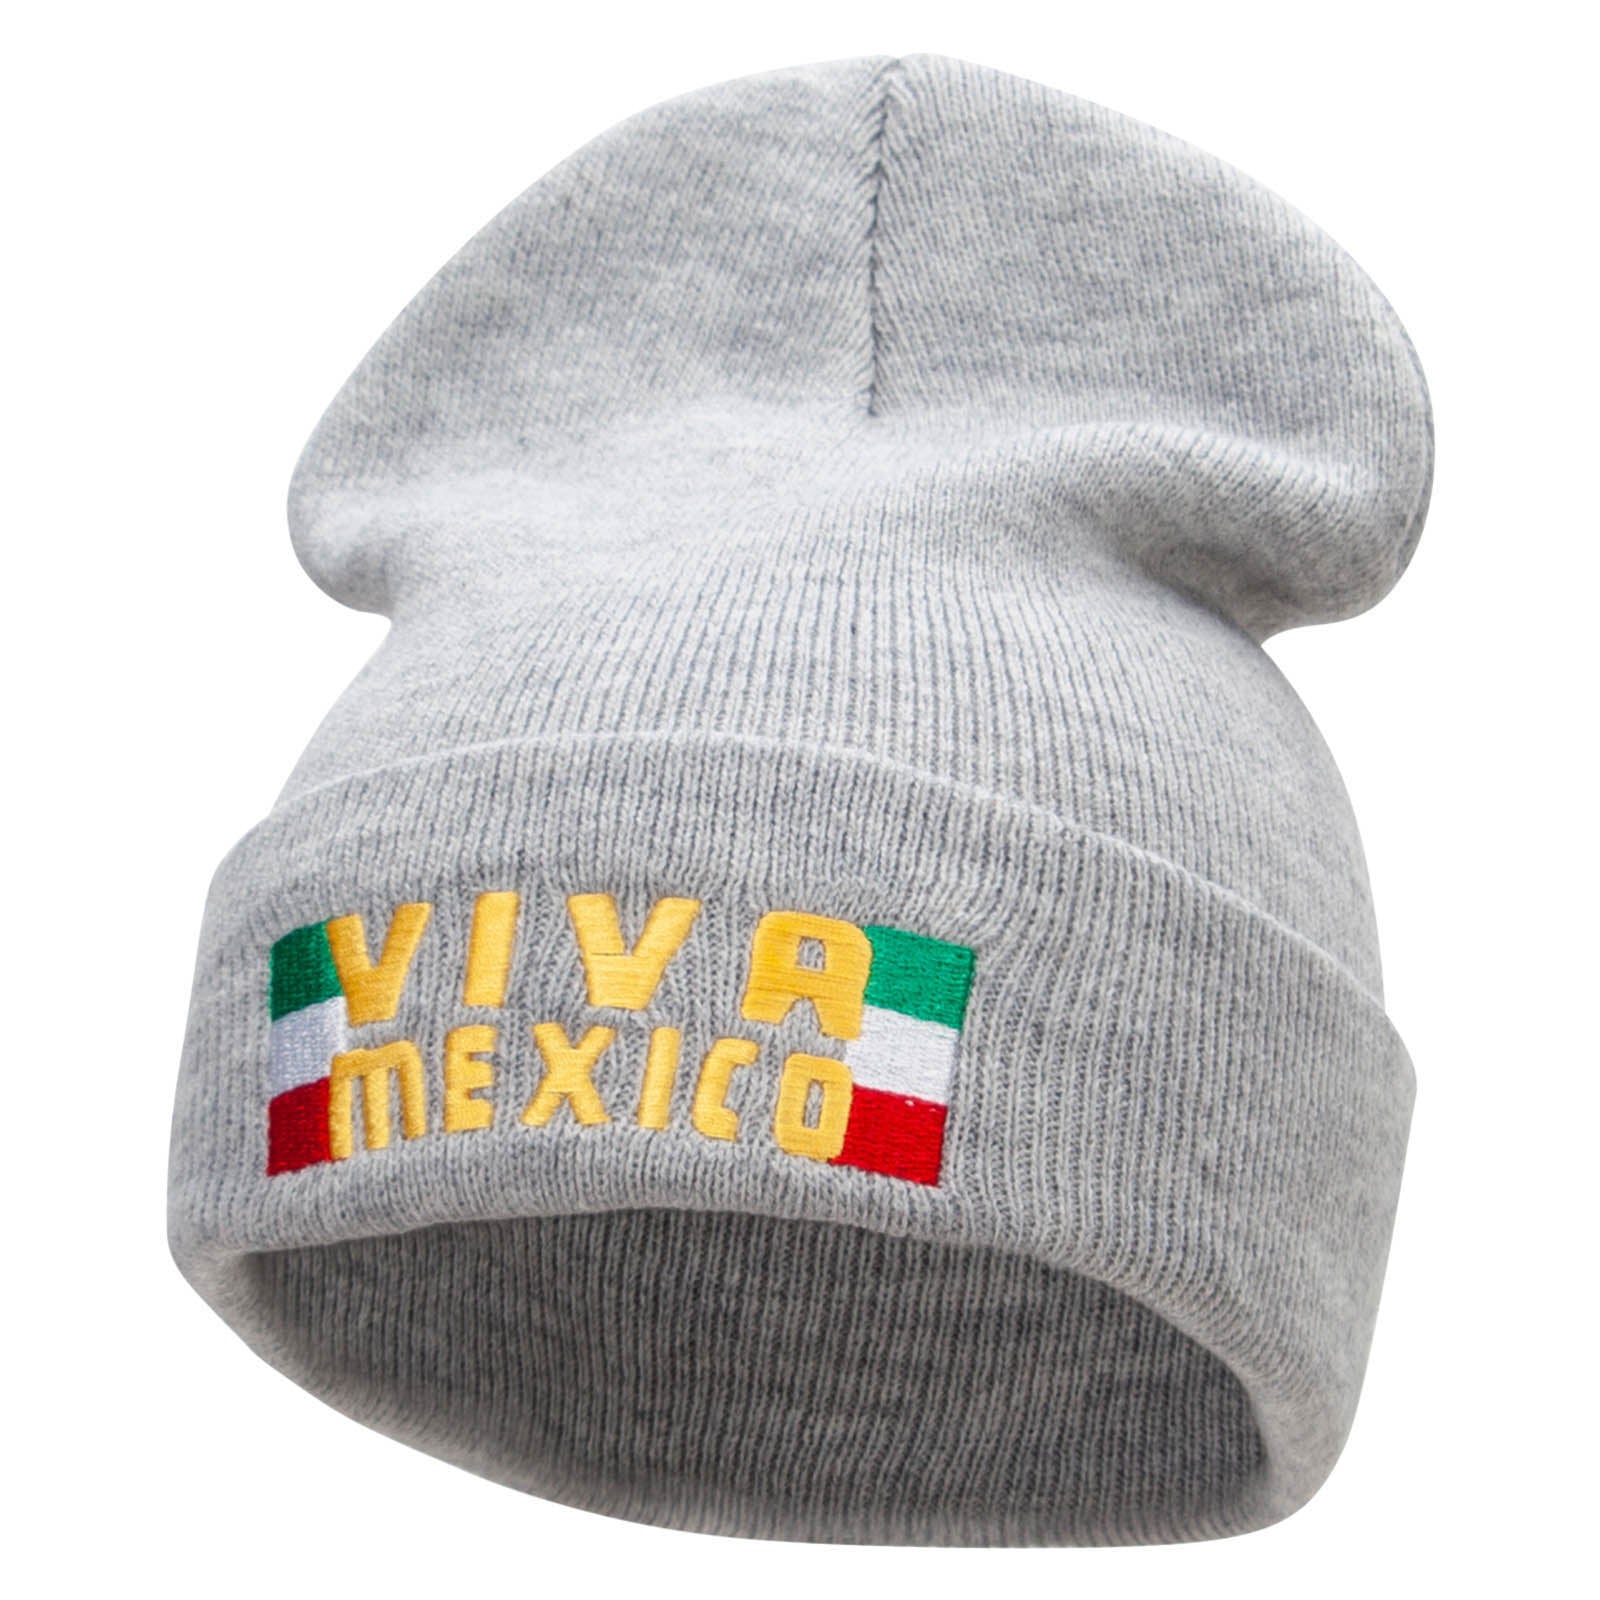 Viva Mexico Flag Embroidered 12 Inch Long Knitted Beanie - Heather Grey OSFM